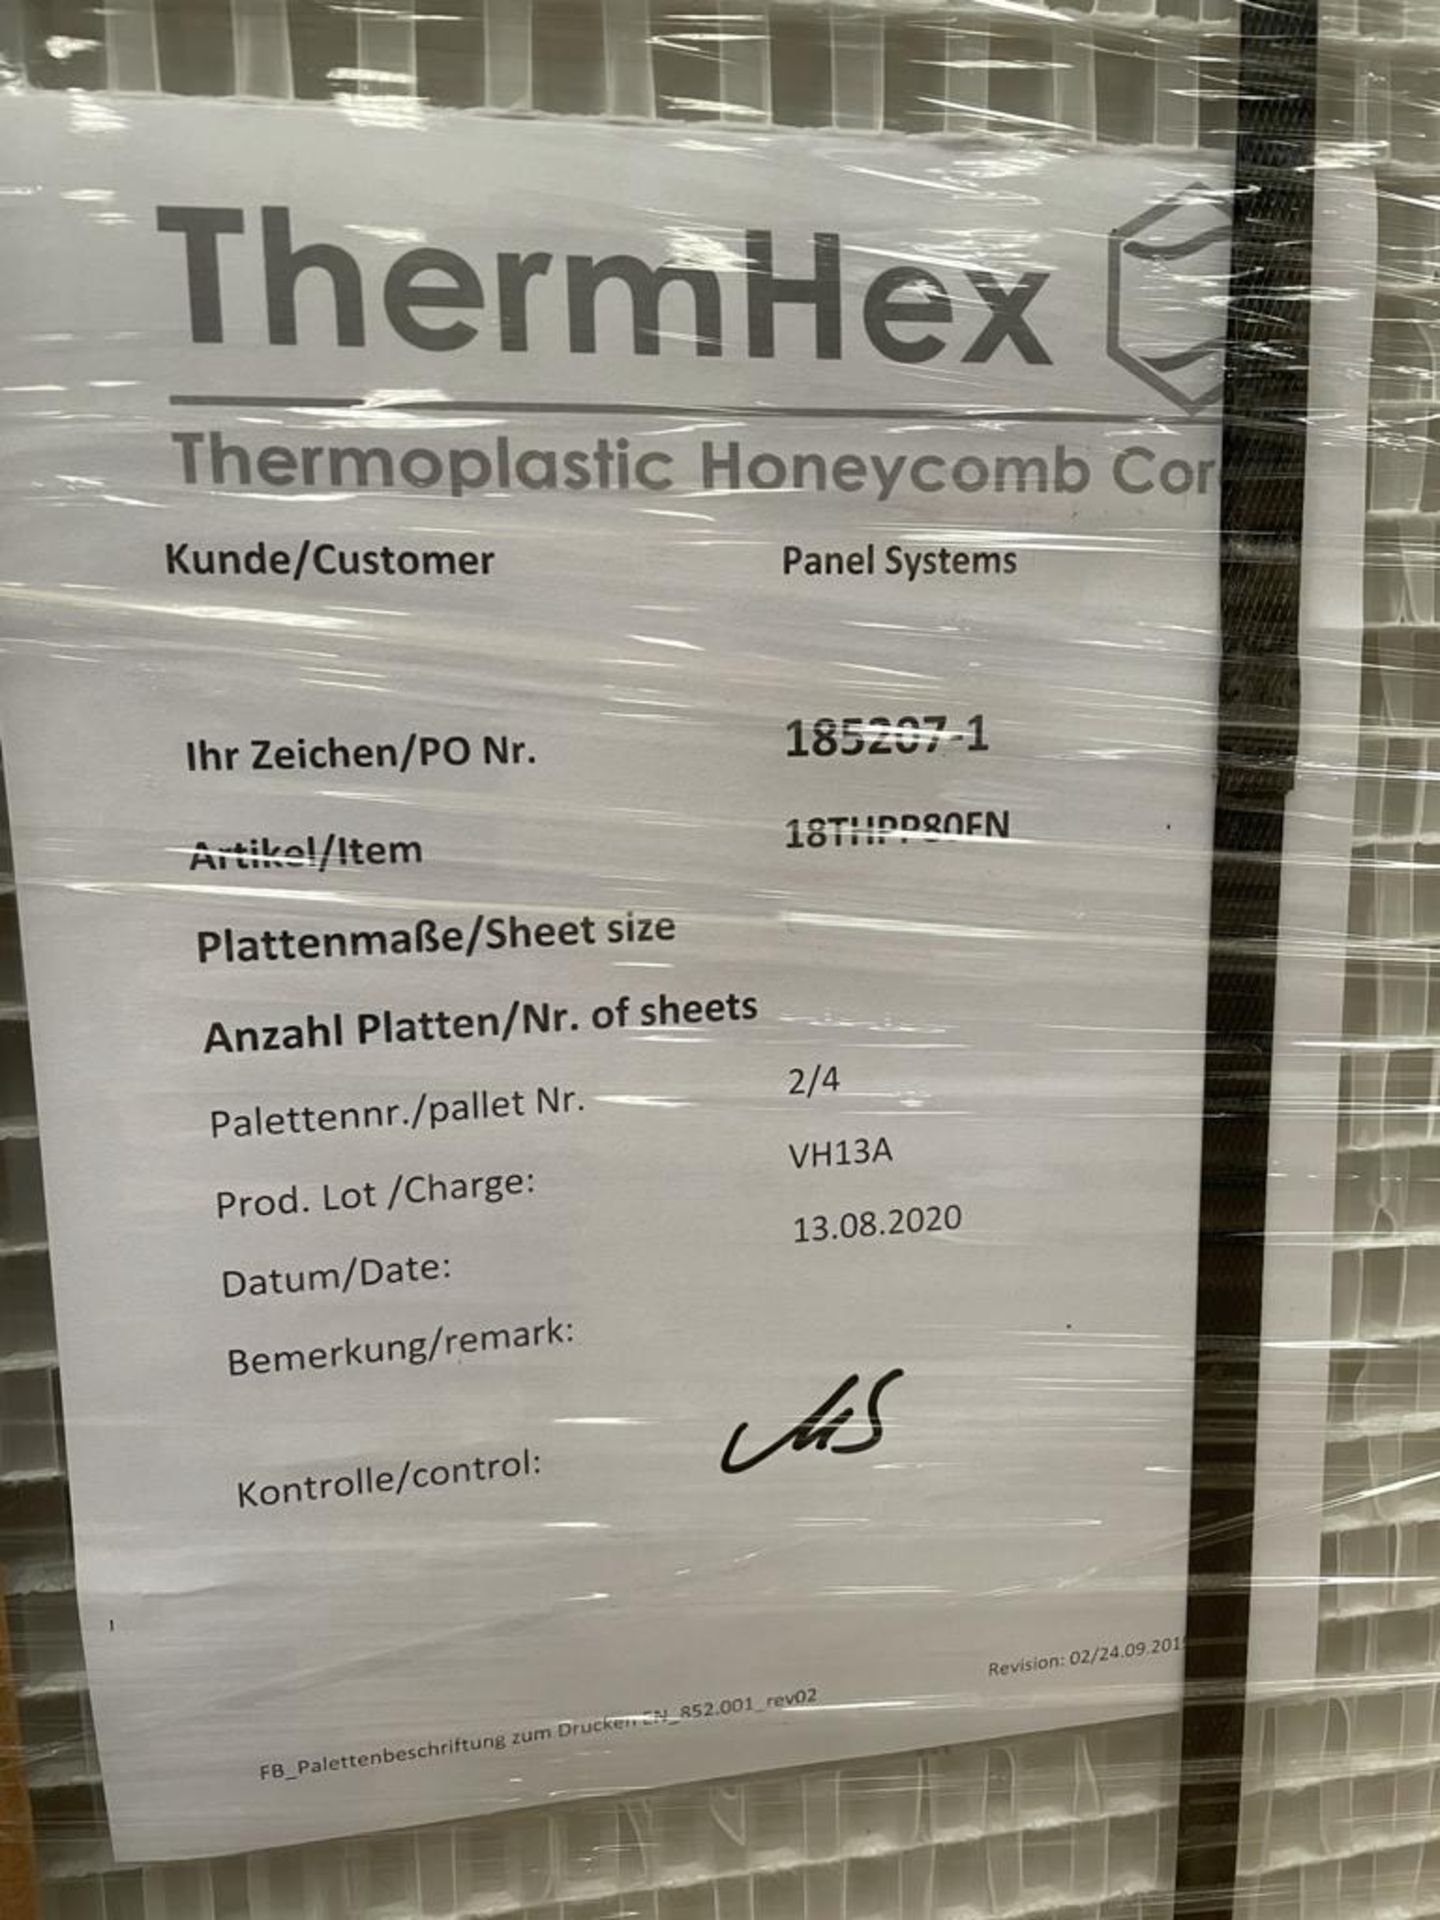 100 x ThermHex Thermoplastic Honeycomb Core Panels - Size: 3175 x 1210 x 20mm - New Stock - Lightwe - Image 2 of 8